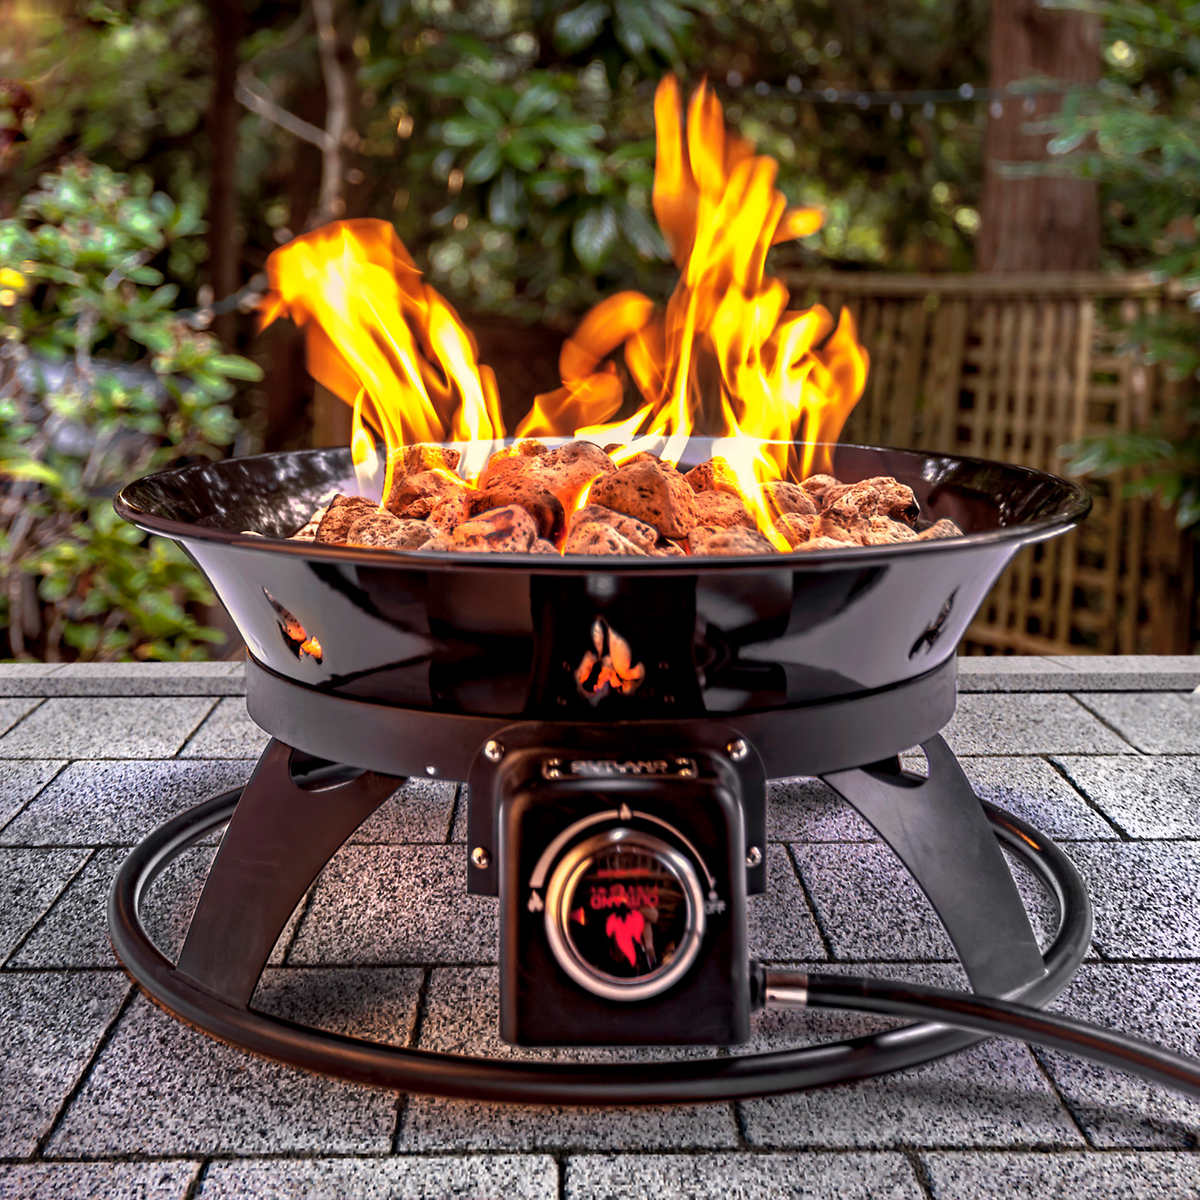 Outland Firebowl Outdoor Firepit Costco, Portable Gas Fire Pit Camping